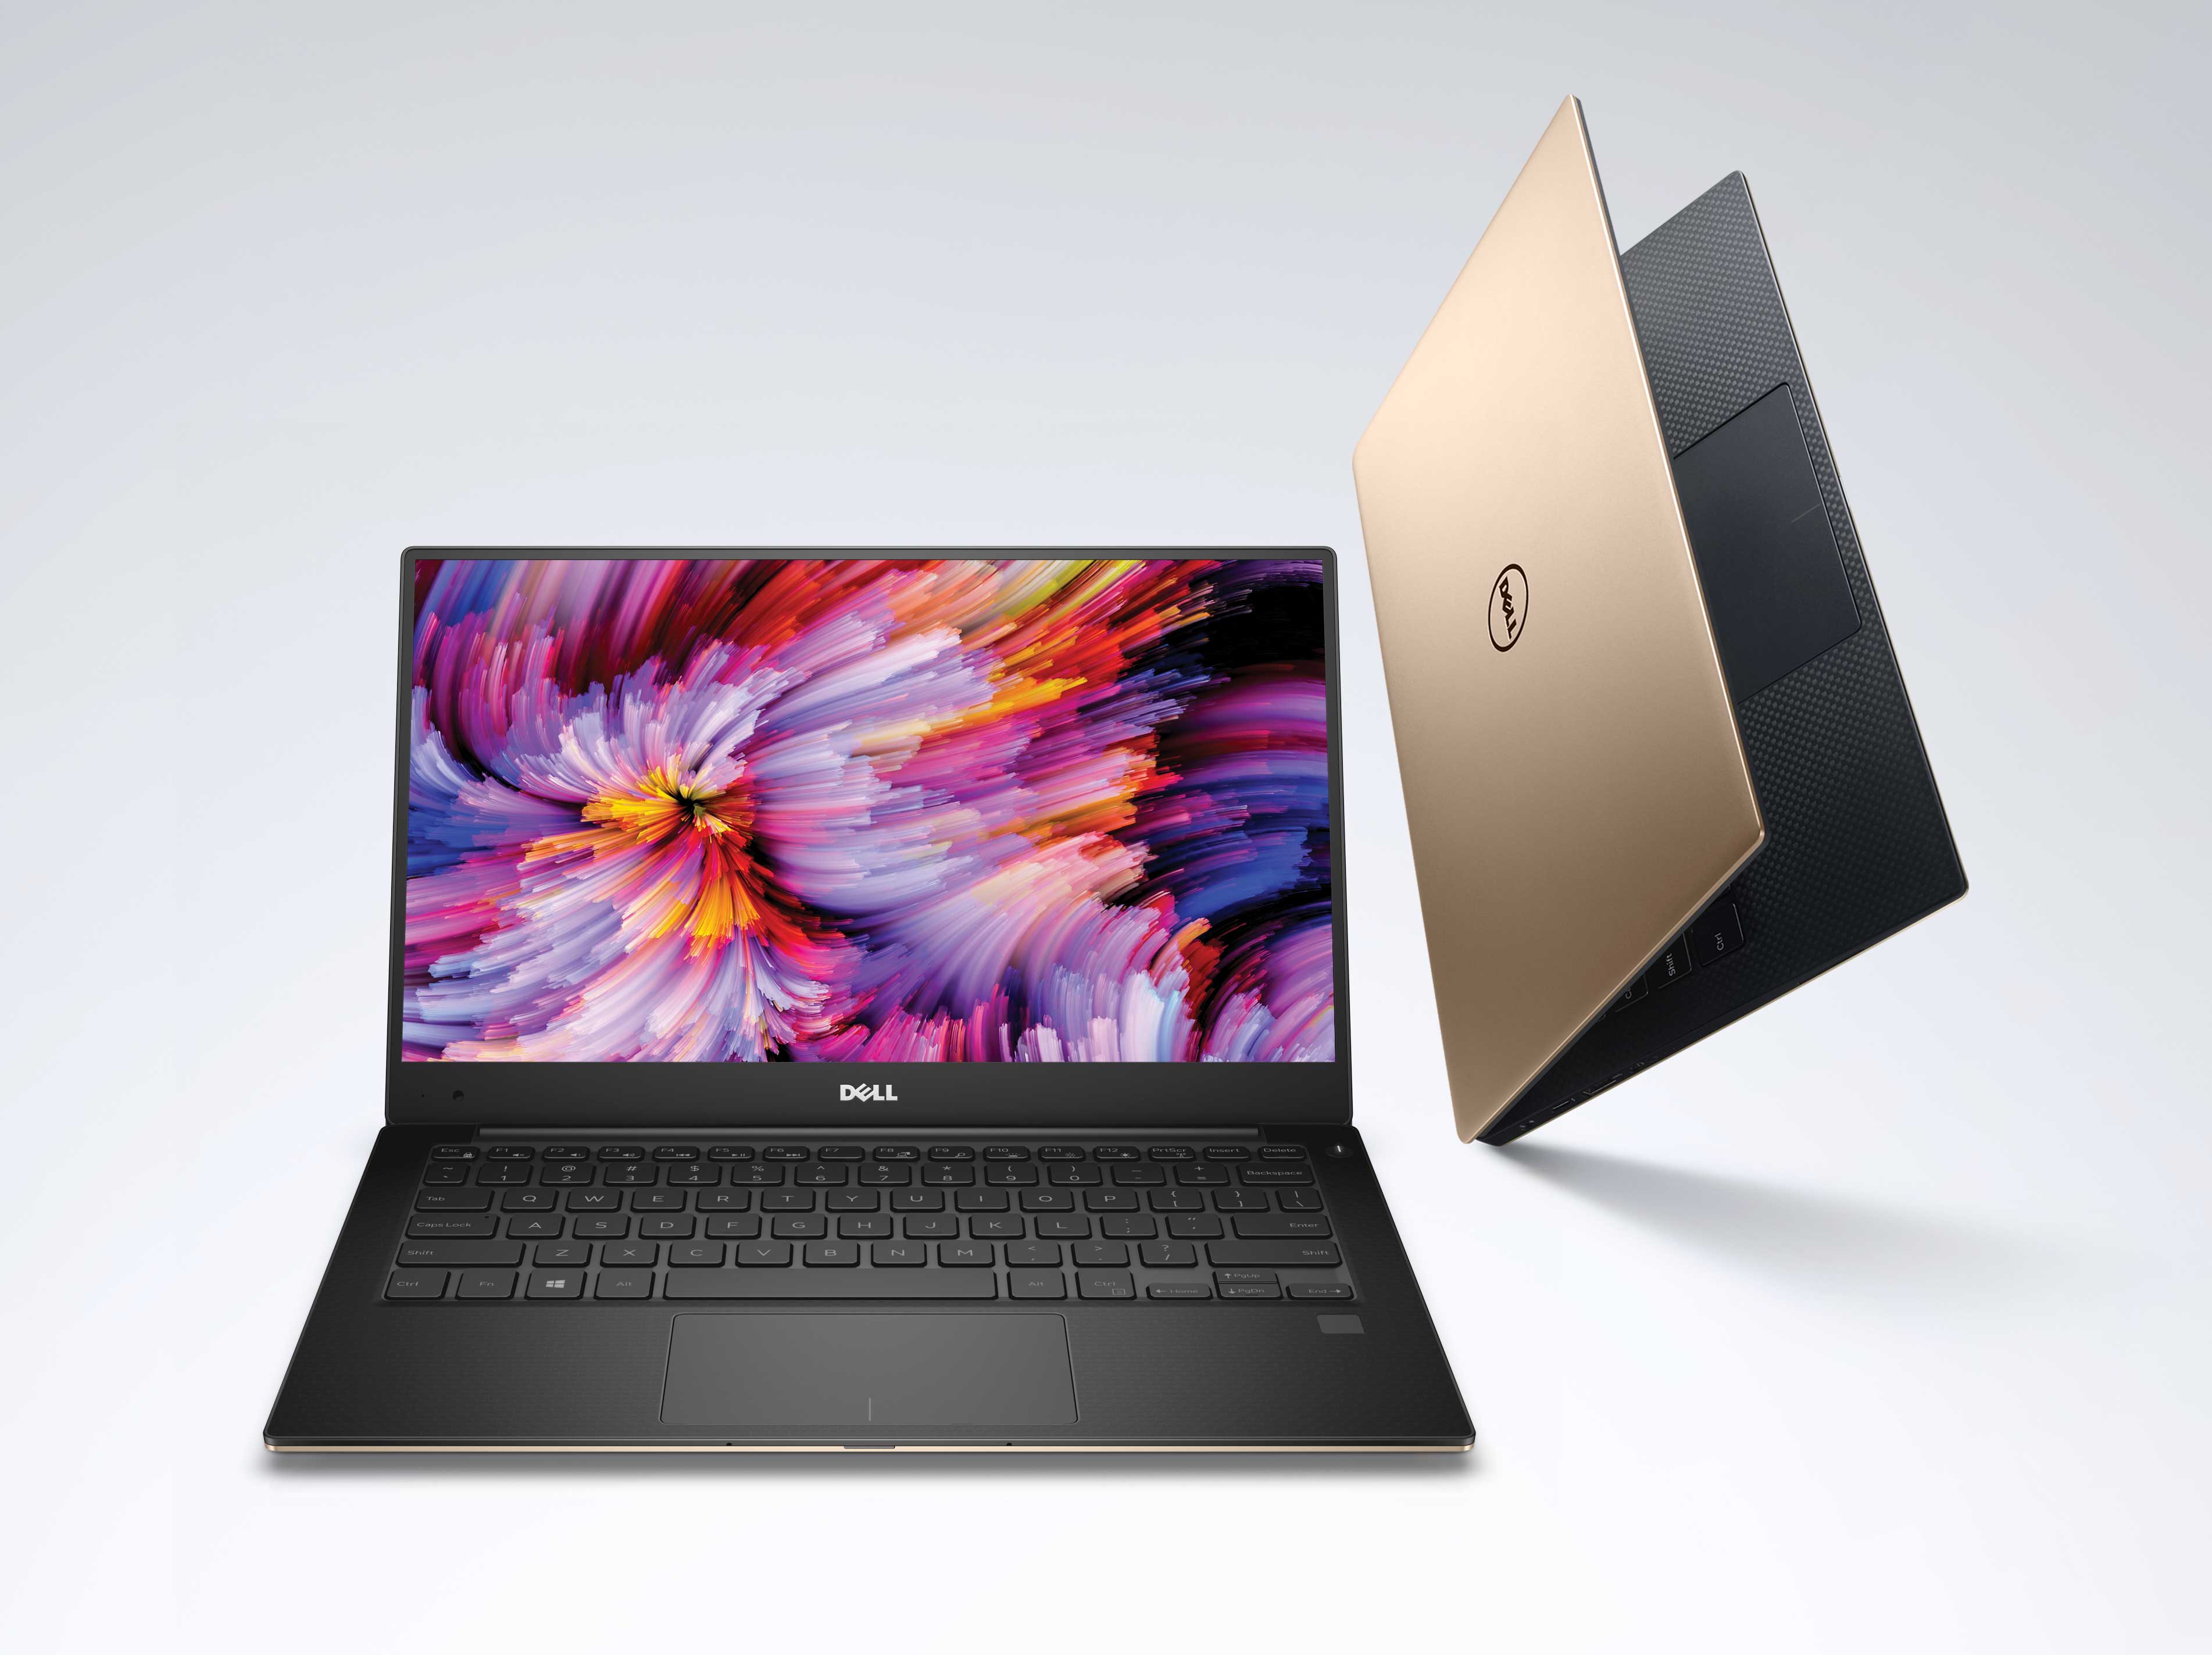 Dell XPS 13 laptop powered by Windows 10